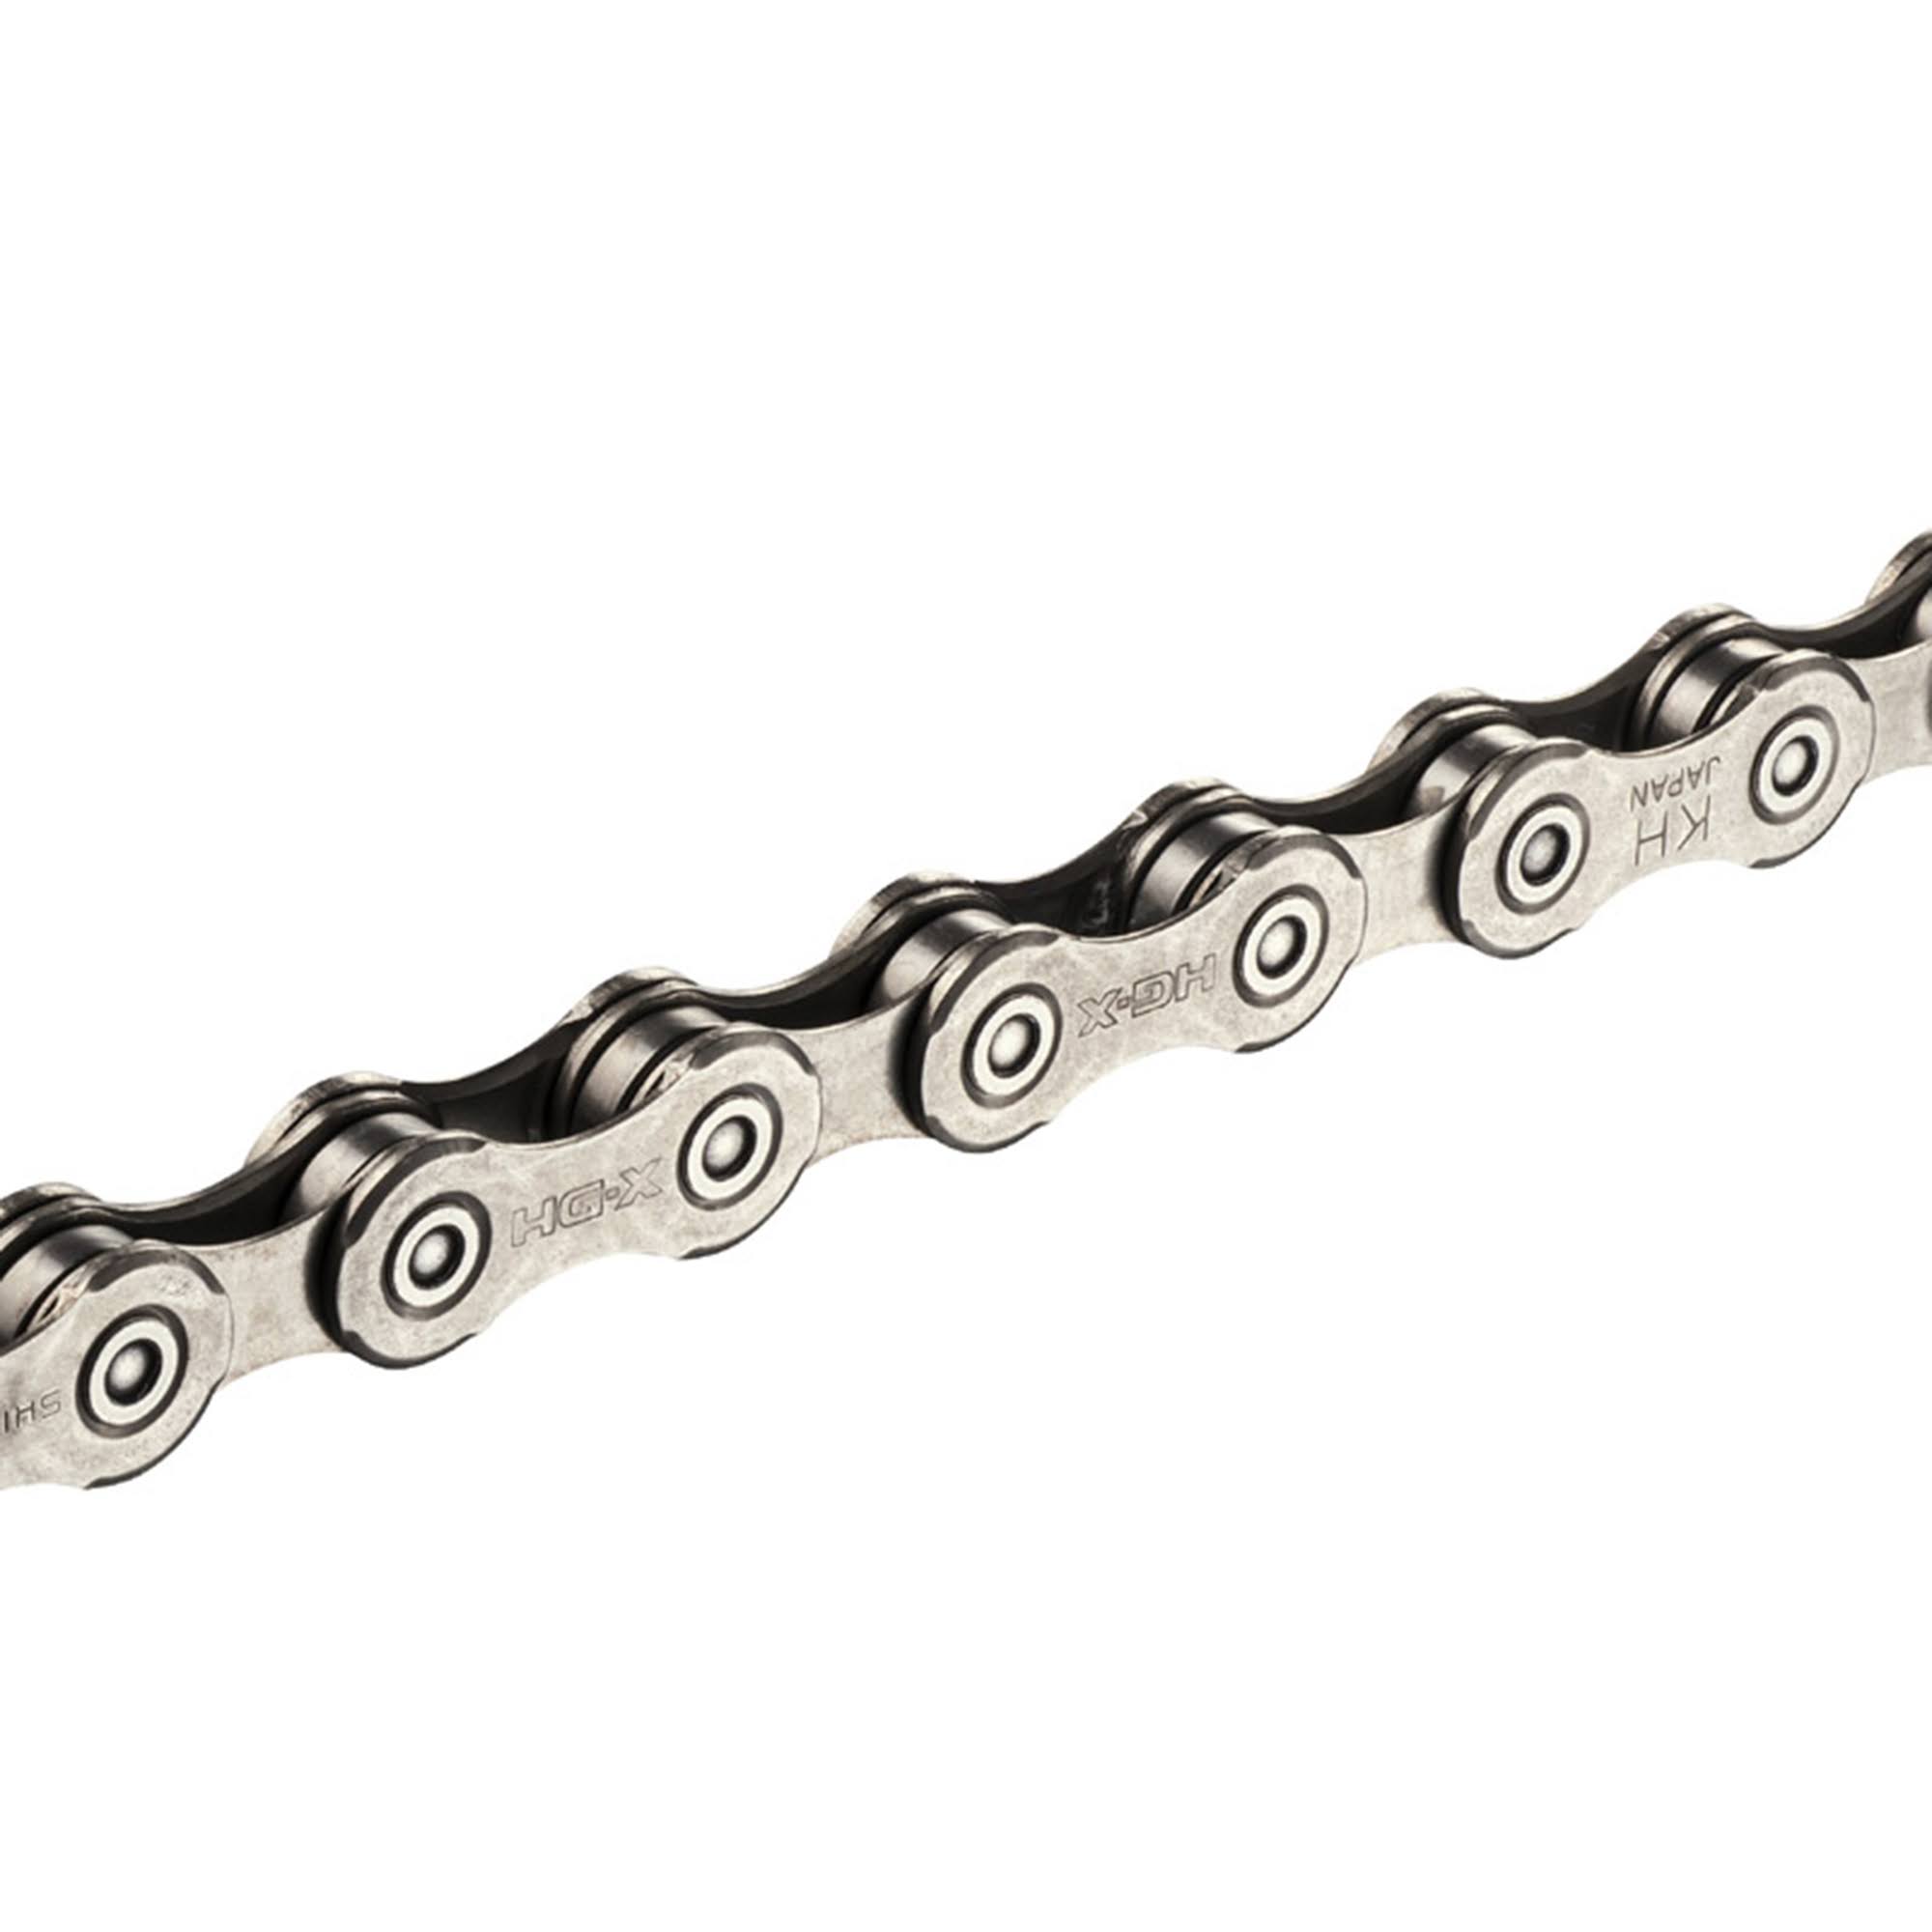 Shimano CN-HG95 MTB Bicycle Chain - 10 Speed, 114 Links